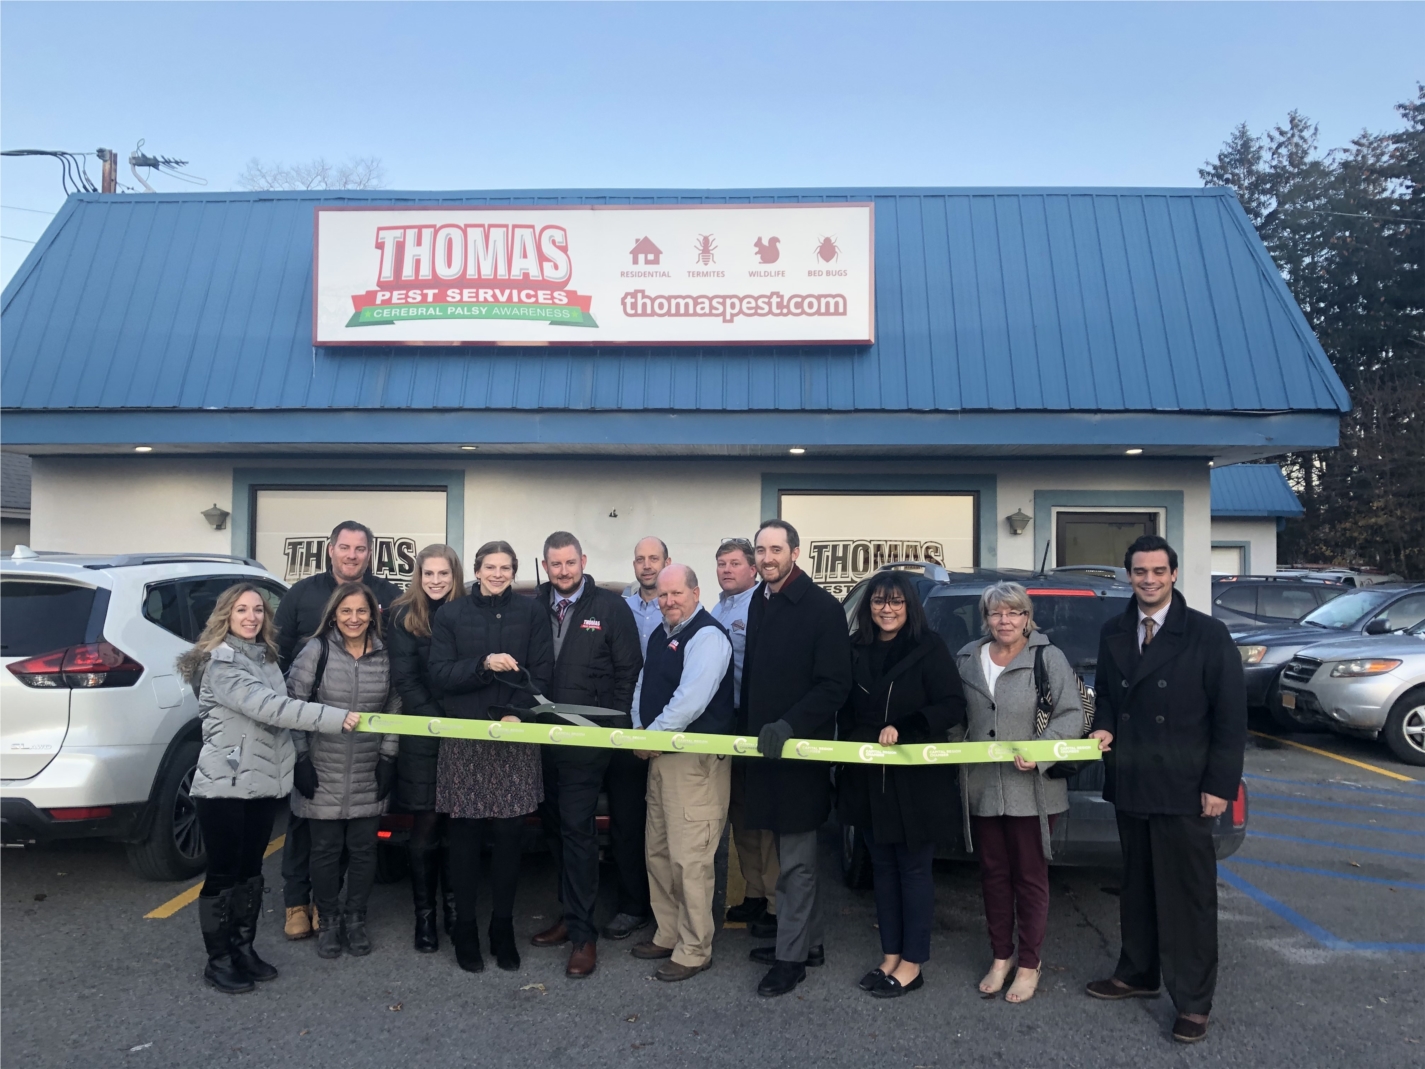 Associate Attorney Ryan Coyne was proud to attend and support the Capital Region Chamber Ribbon Cutting Ceremony for Thomas Pest Services new location in Rotterdam.